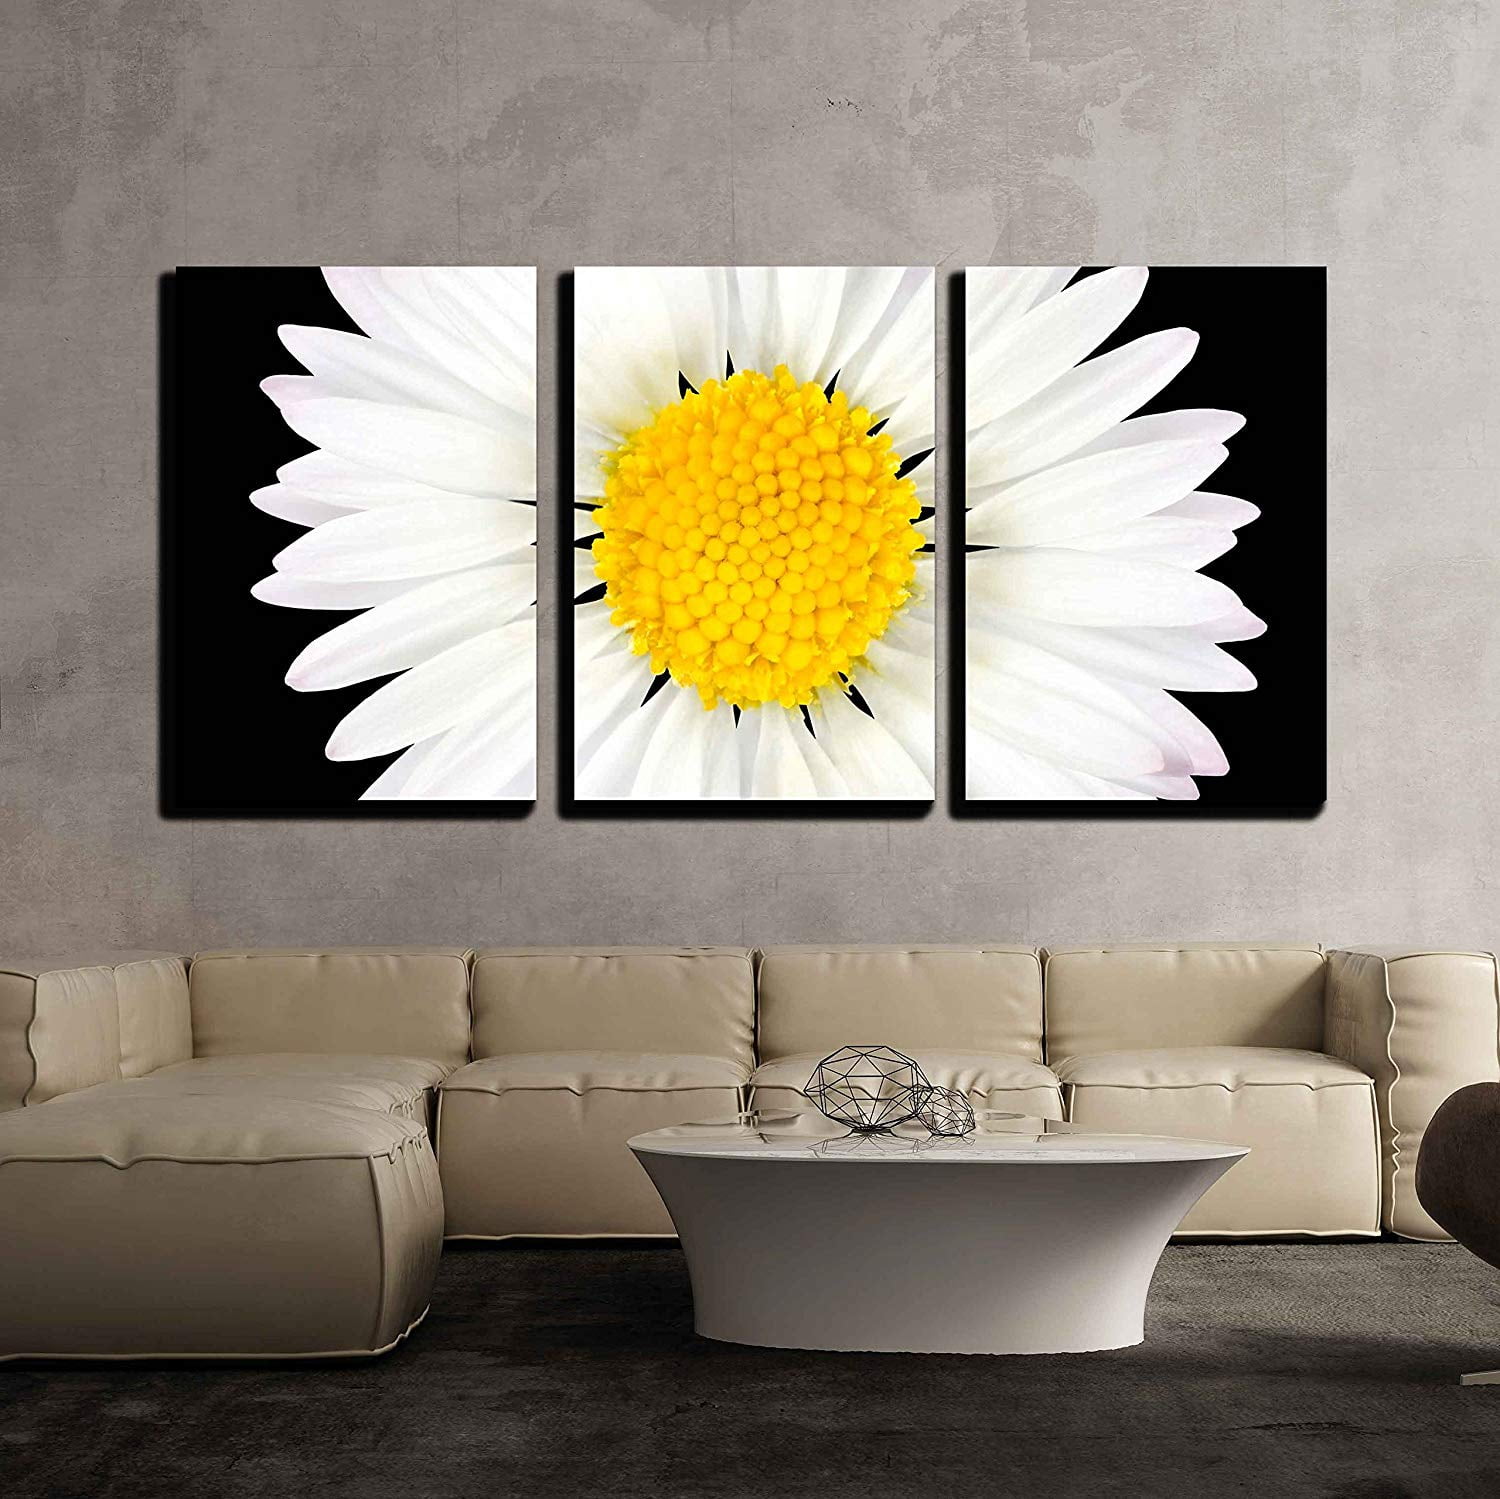 Rose Flowers Daisy Butterfly Contemporary Wall Picture Gold Framed Art Print 